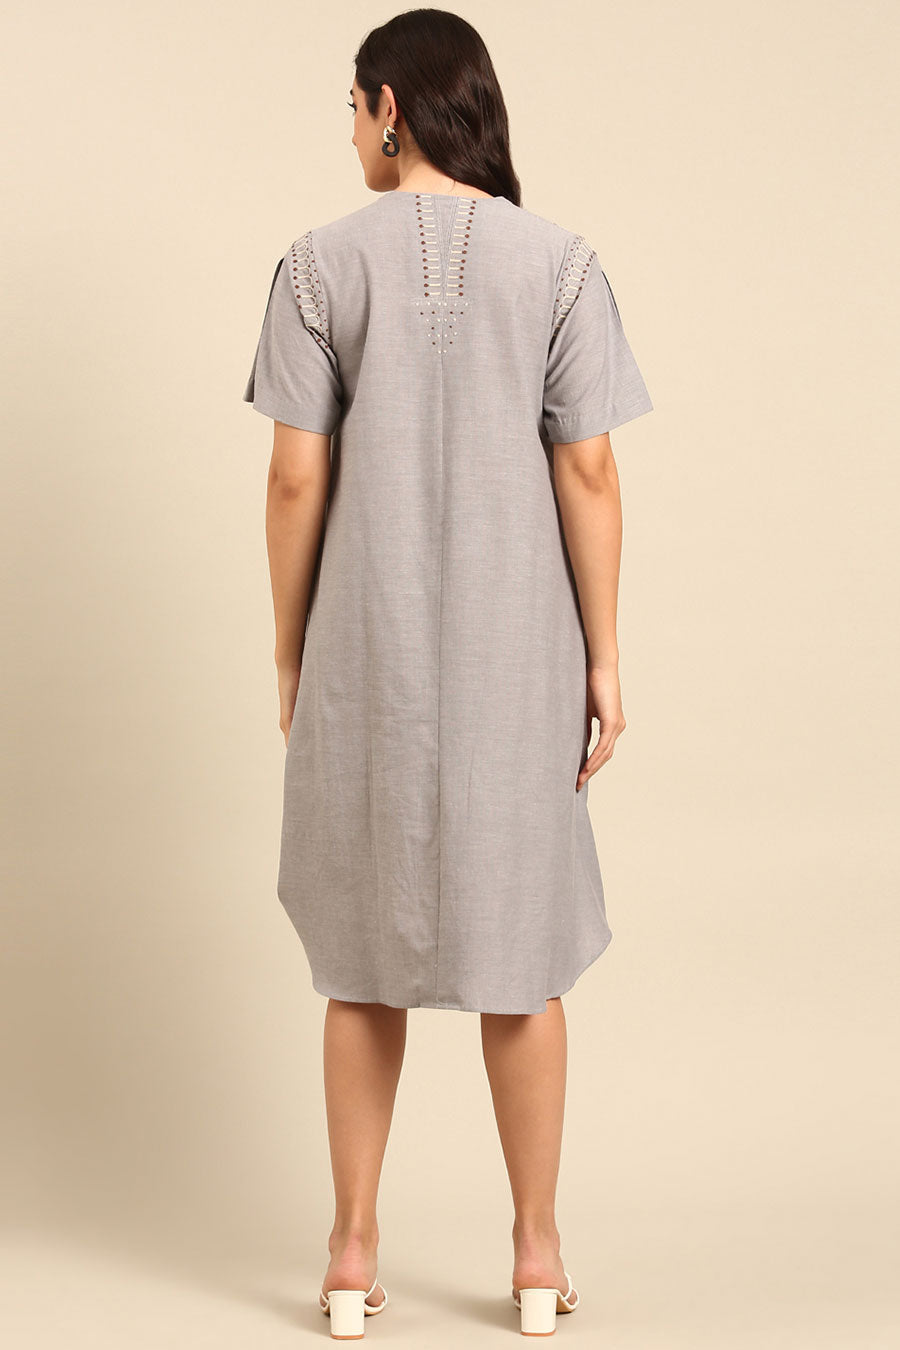 Grey Embroidered A-Line Dress